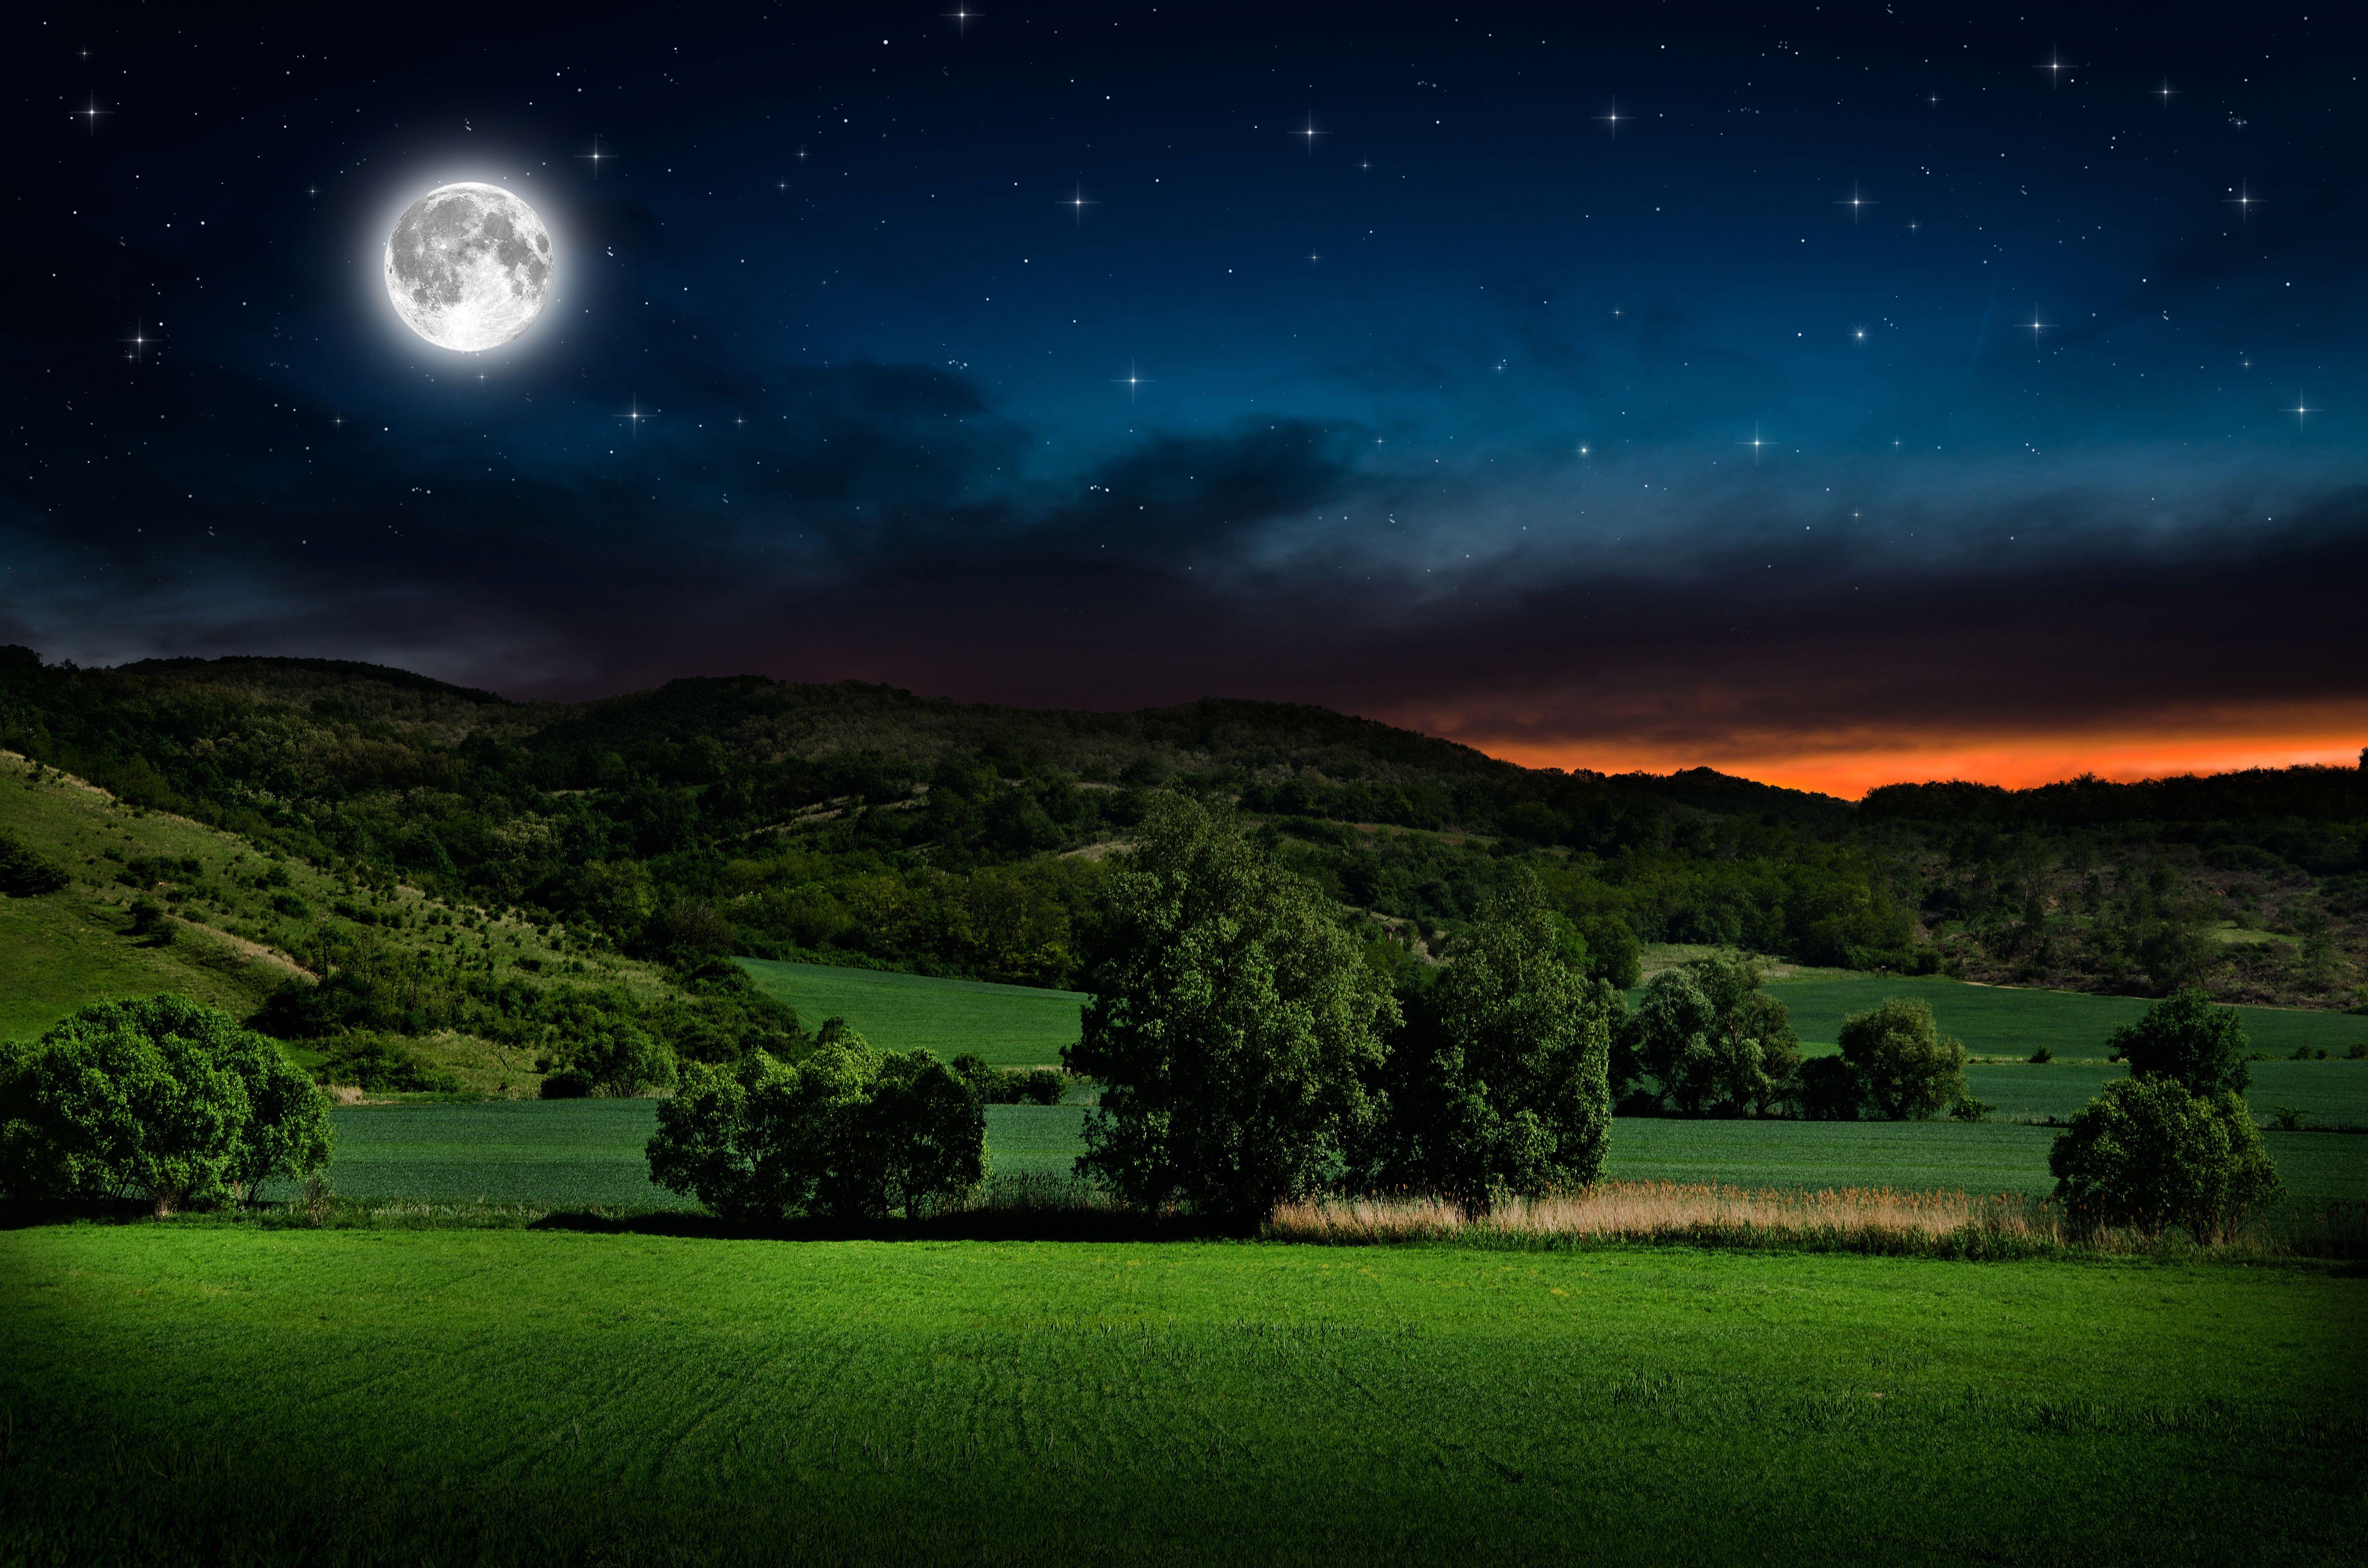 Full Moon and Starry Sky over Green Field 4k Ultra HD Wallpaper